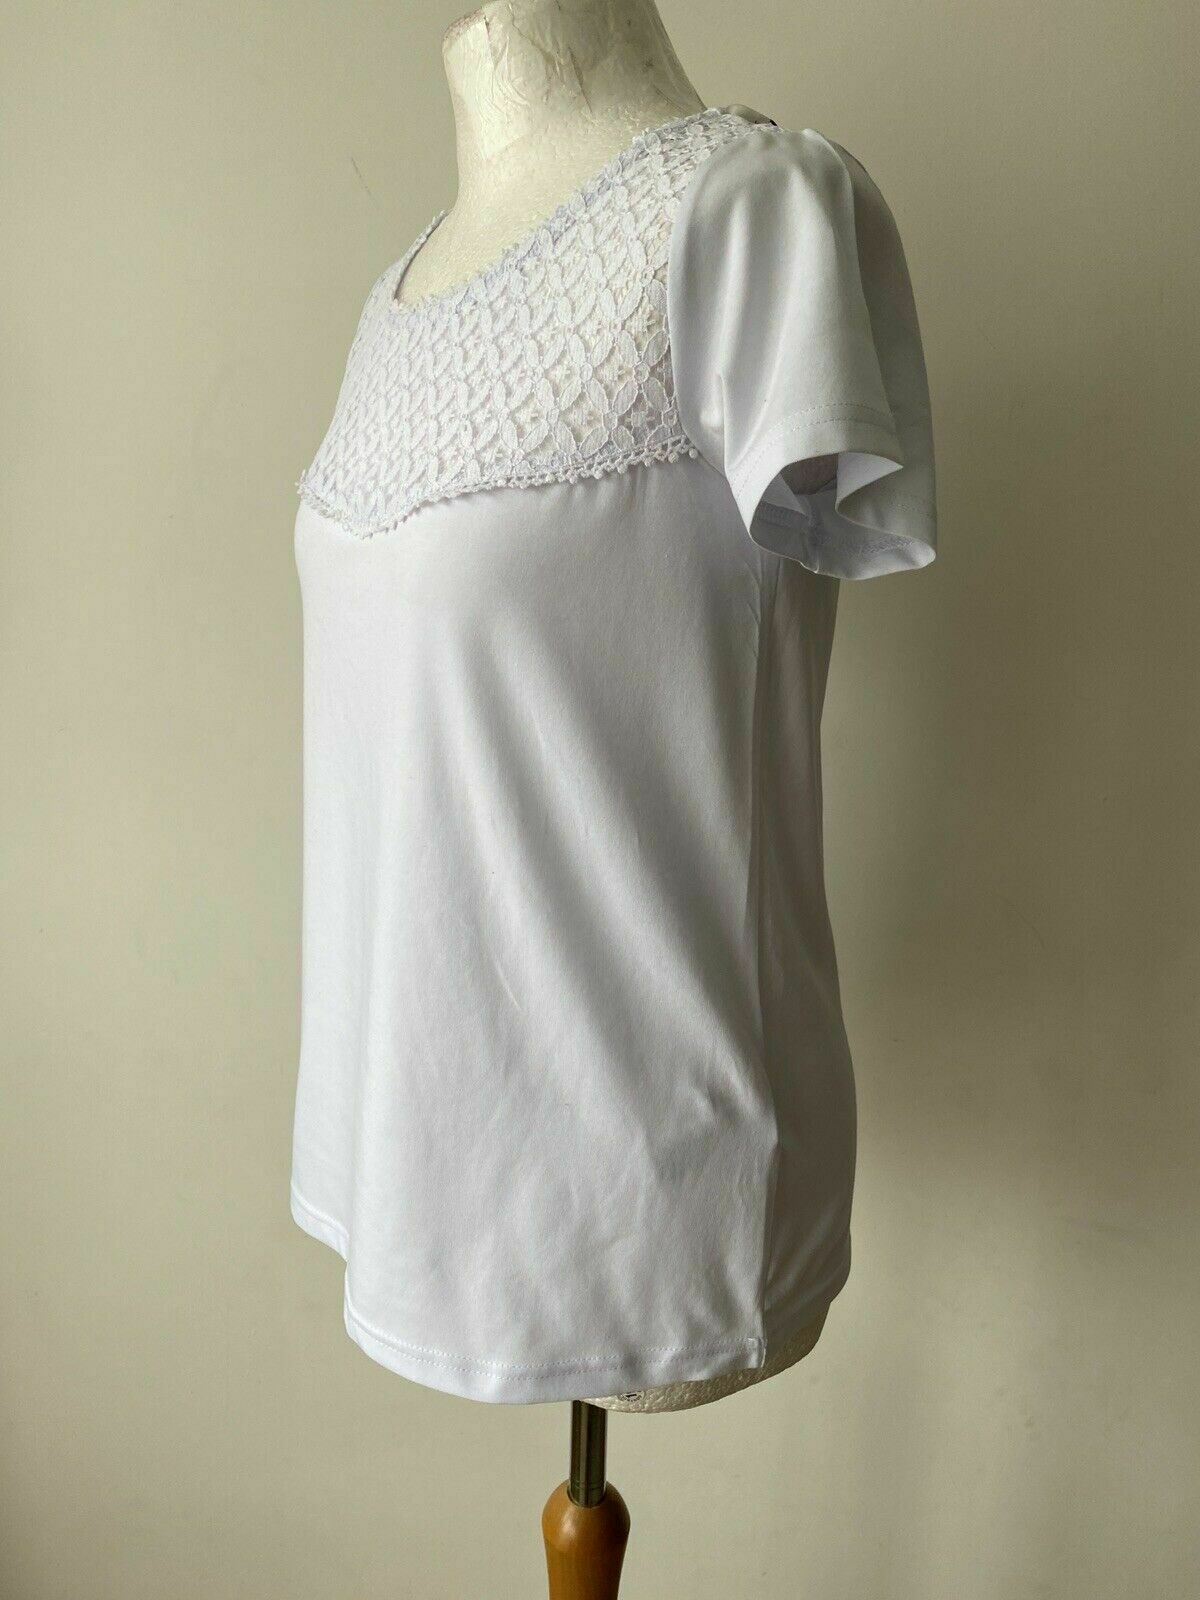 Soyaconcept White Tee Lace Neckline Size S 8 - 10